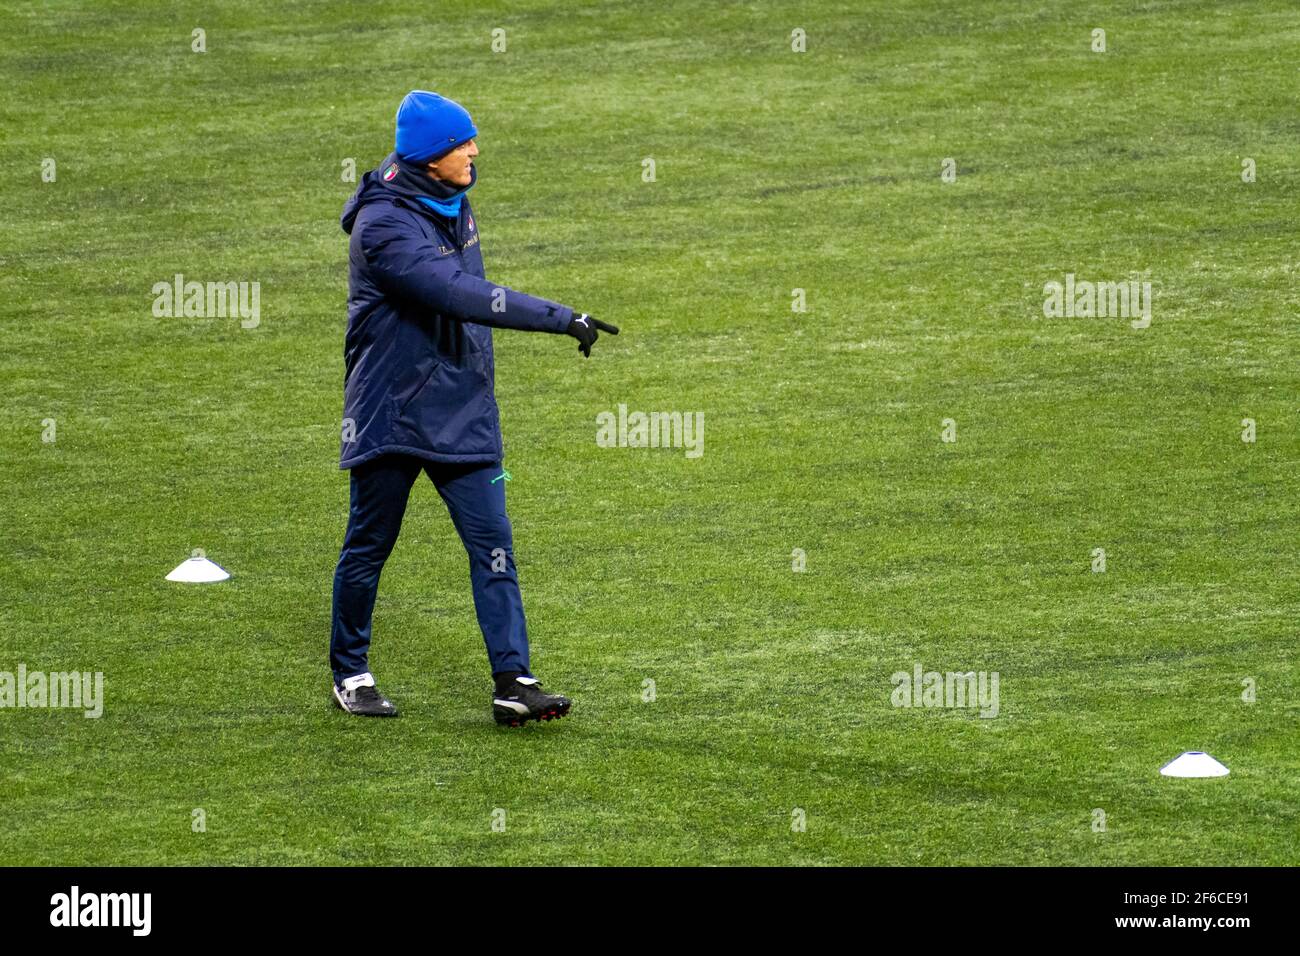 CT coach Roberto Mancini during the training before Lithuania - Italy before World Cup qualifying match Stock Photo